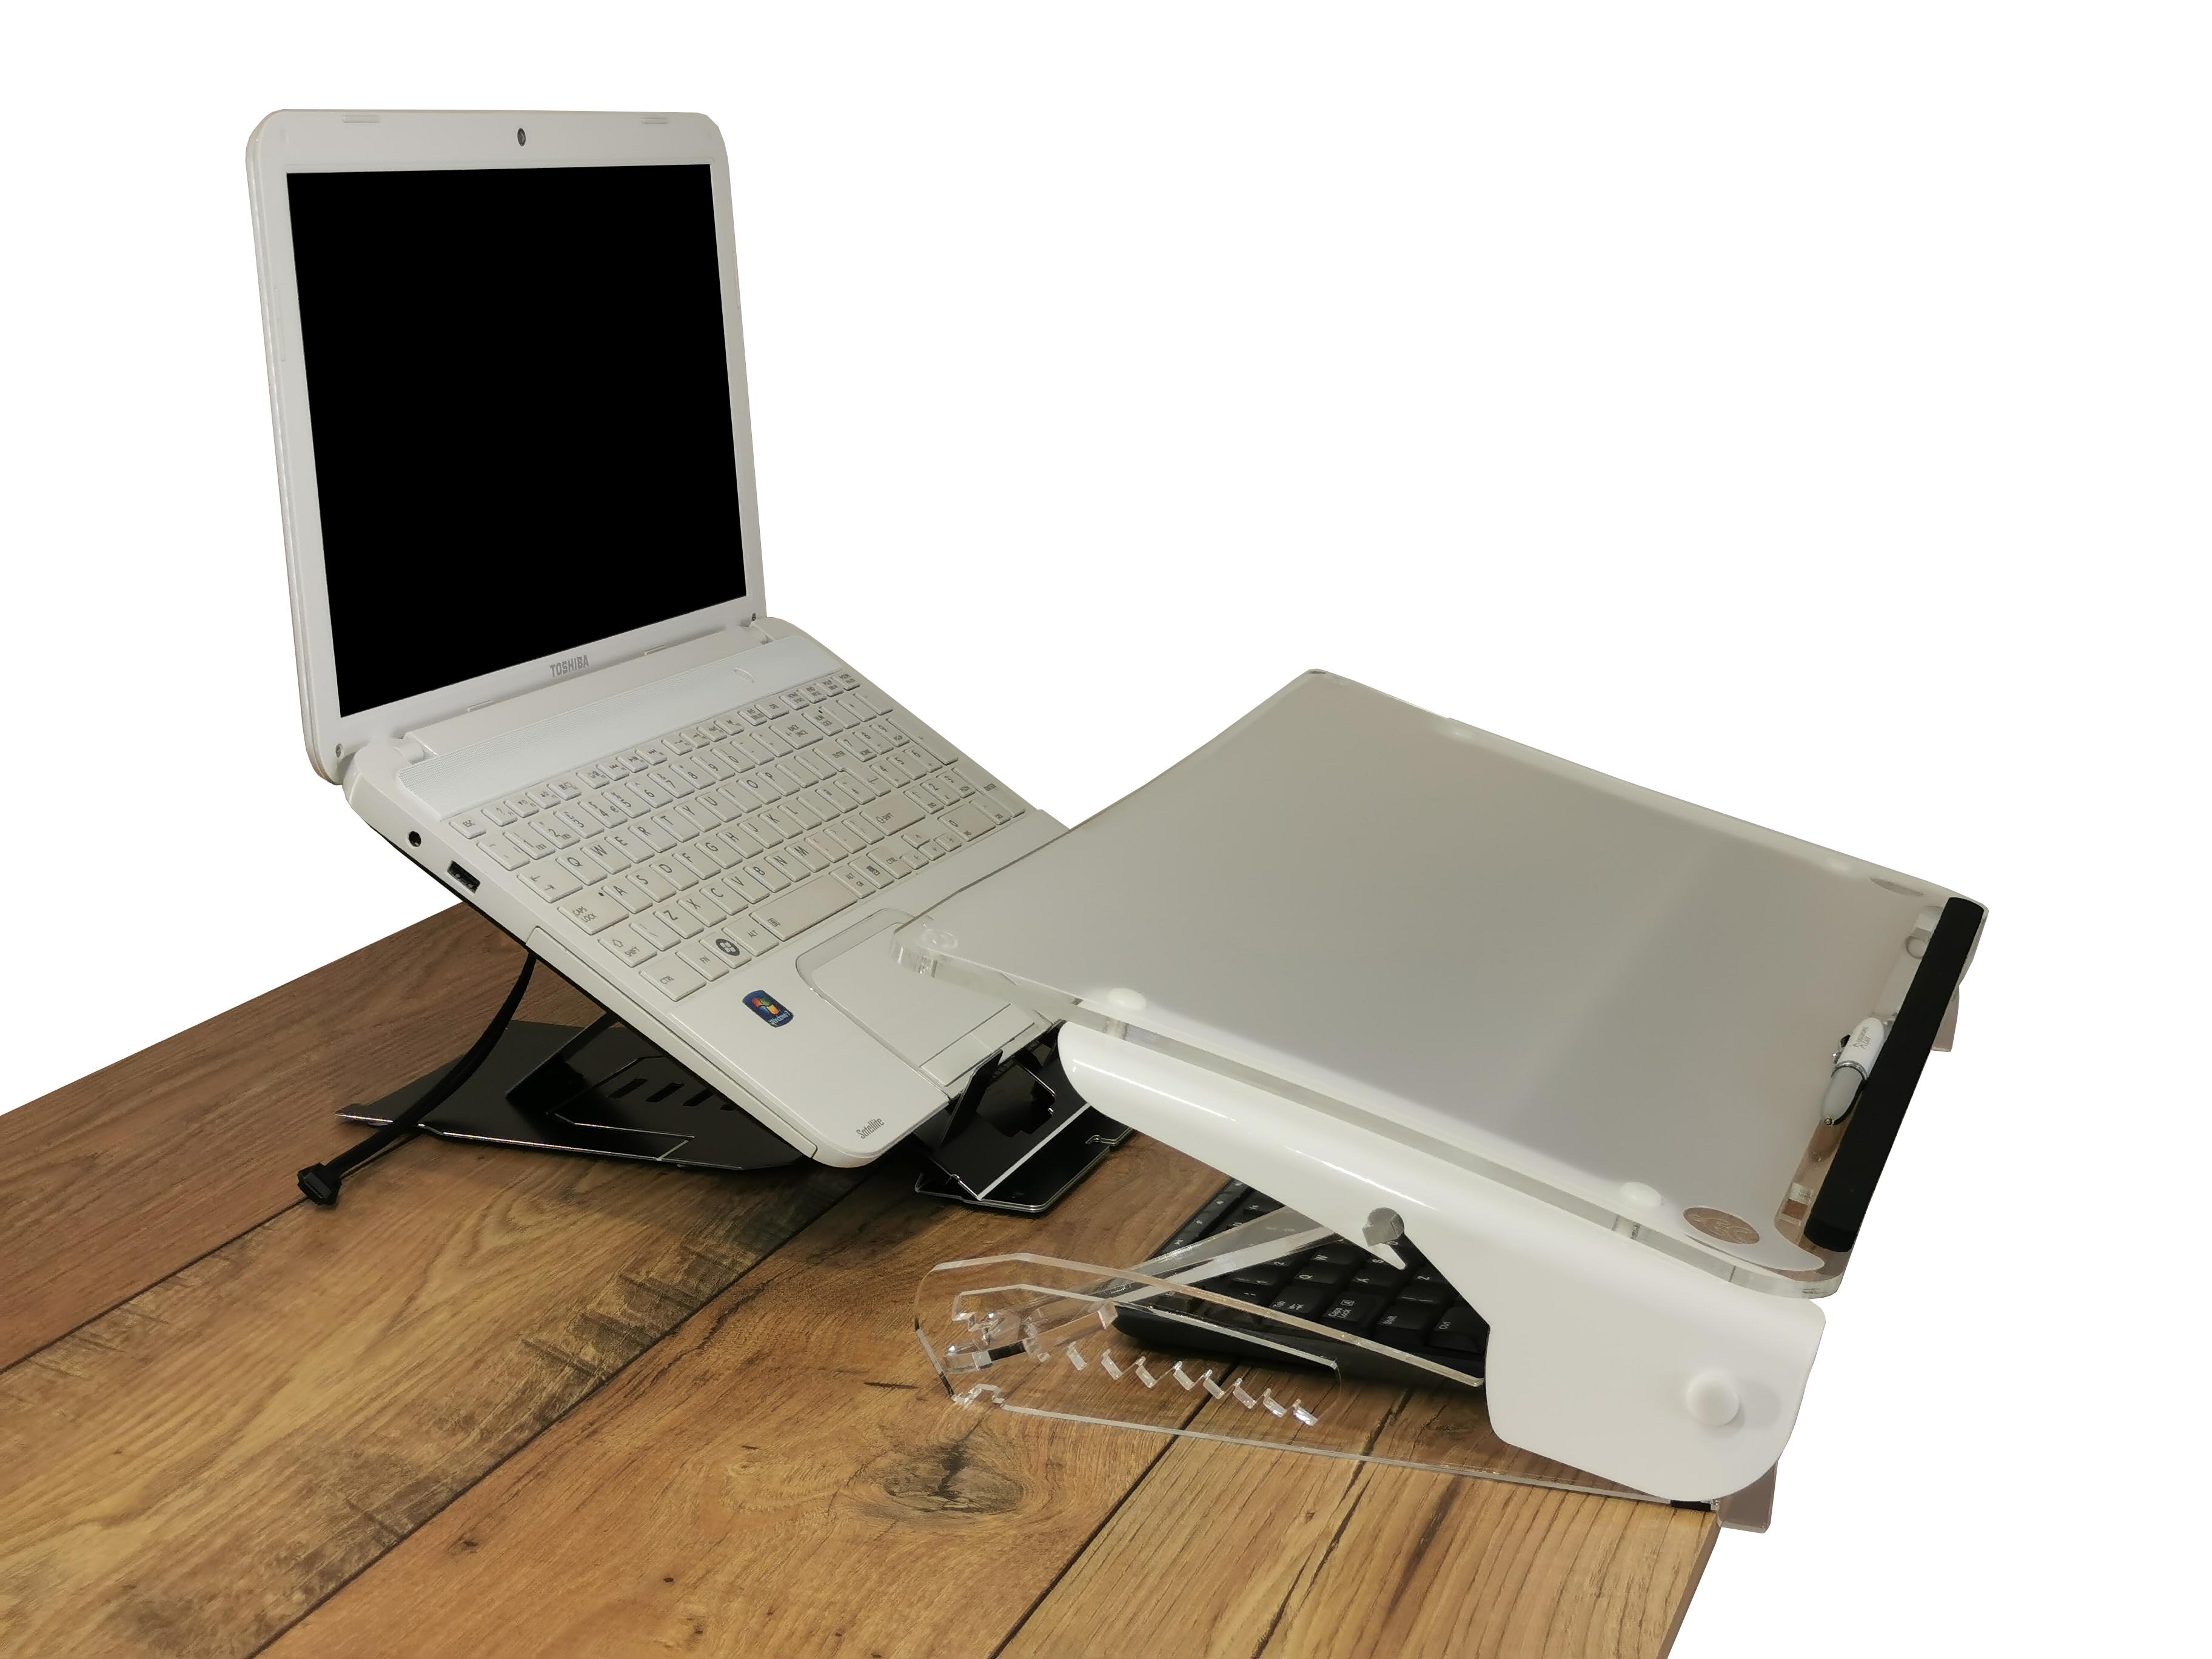 Clear Slope Pro Document Holder on a desk at it's lowest position, there is also a laptop on the desk